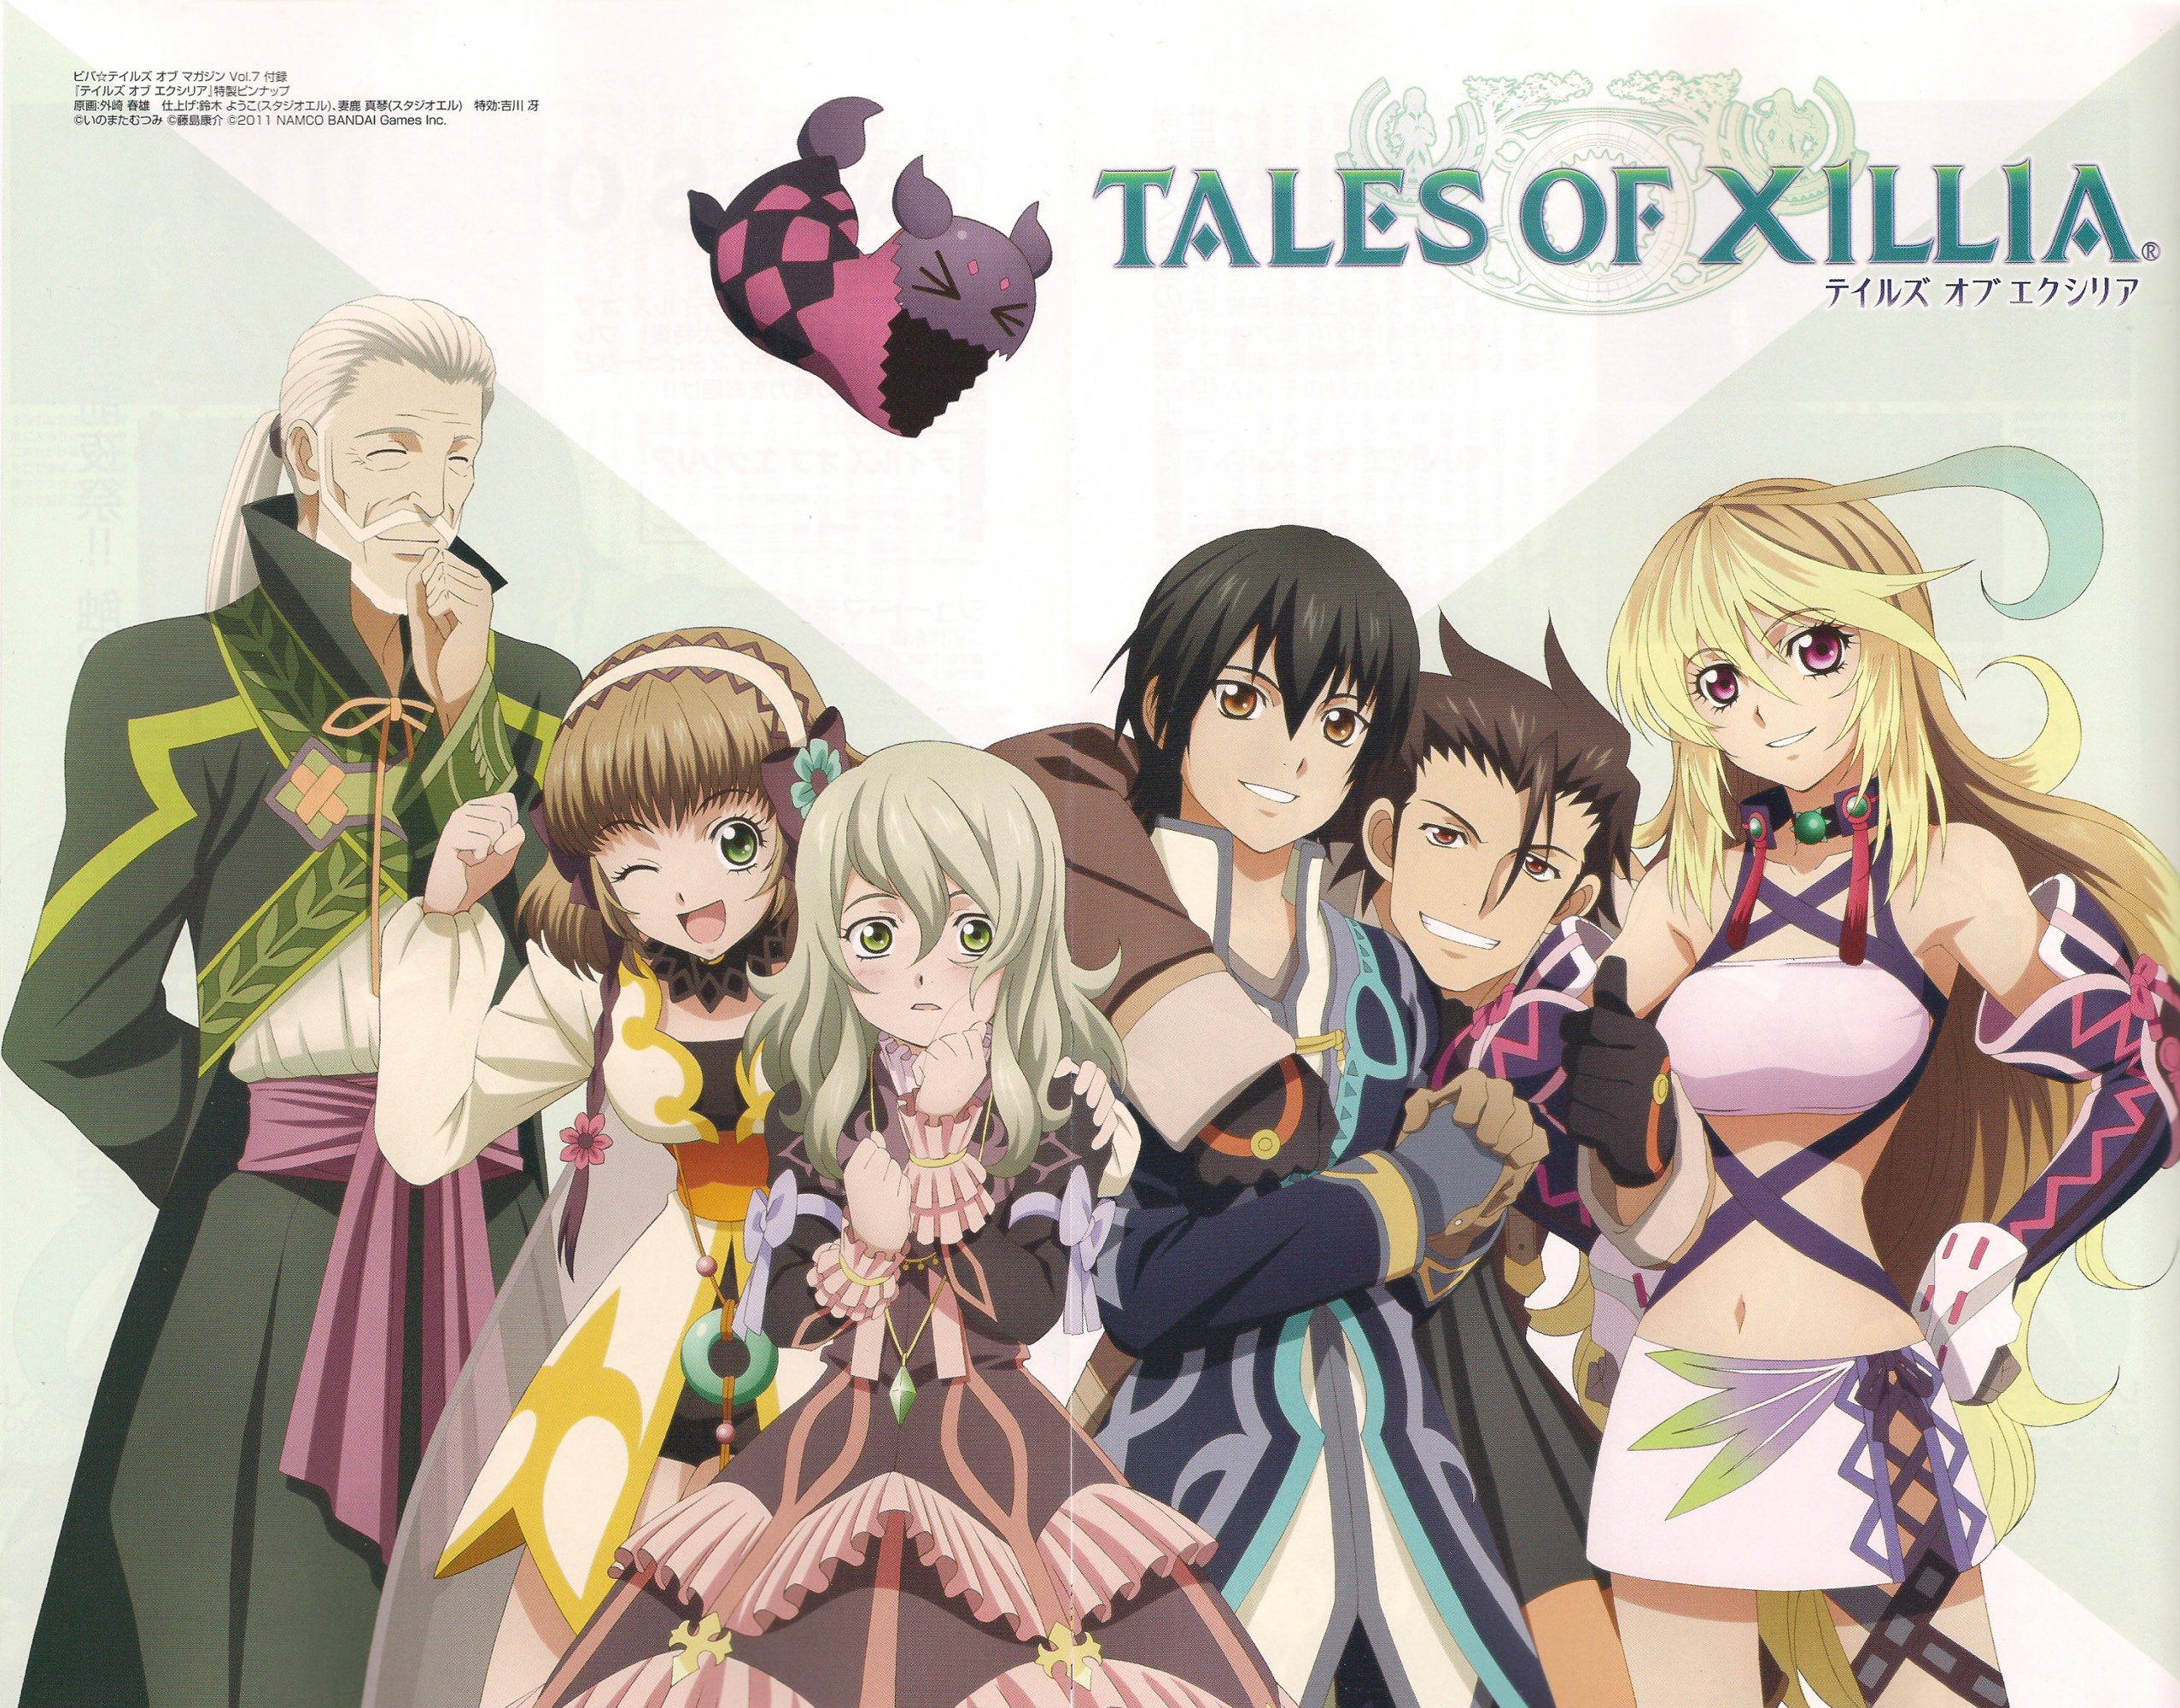 tales-of-xillia-this-summer-tales-of-graces-f-on-psn-march-26-more-tales-surprises-later-this